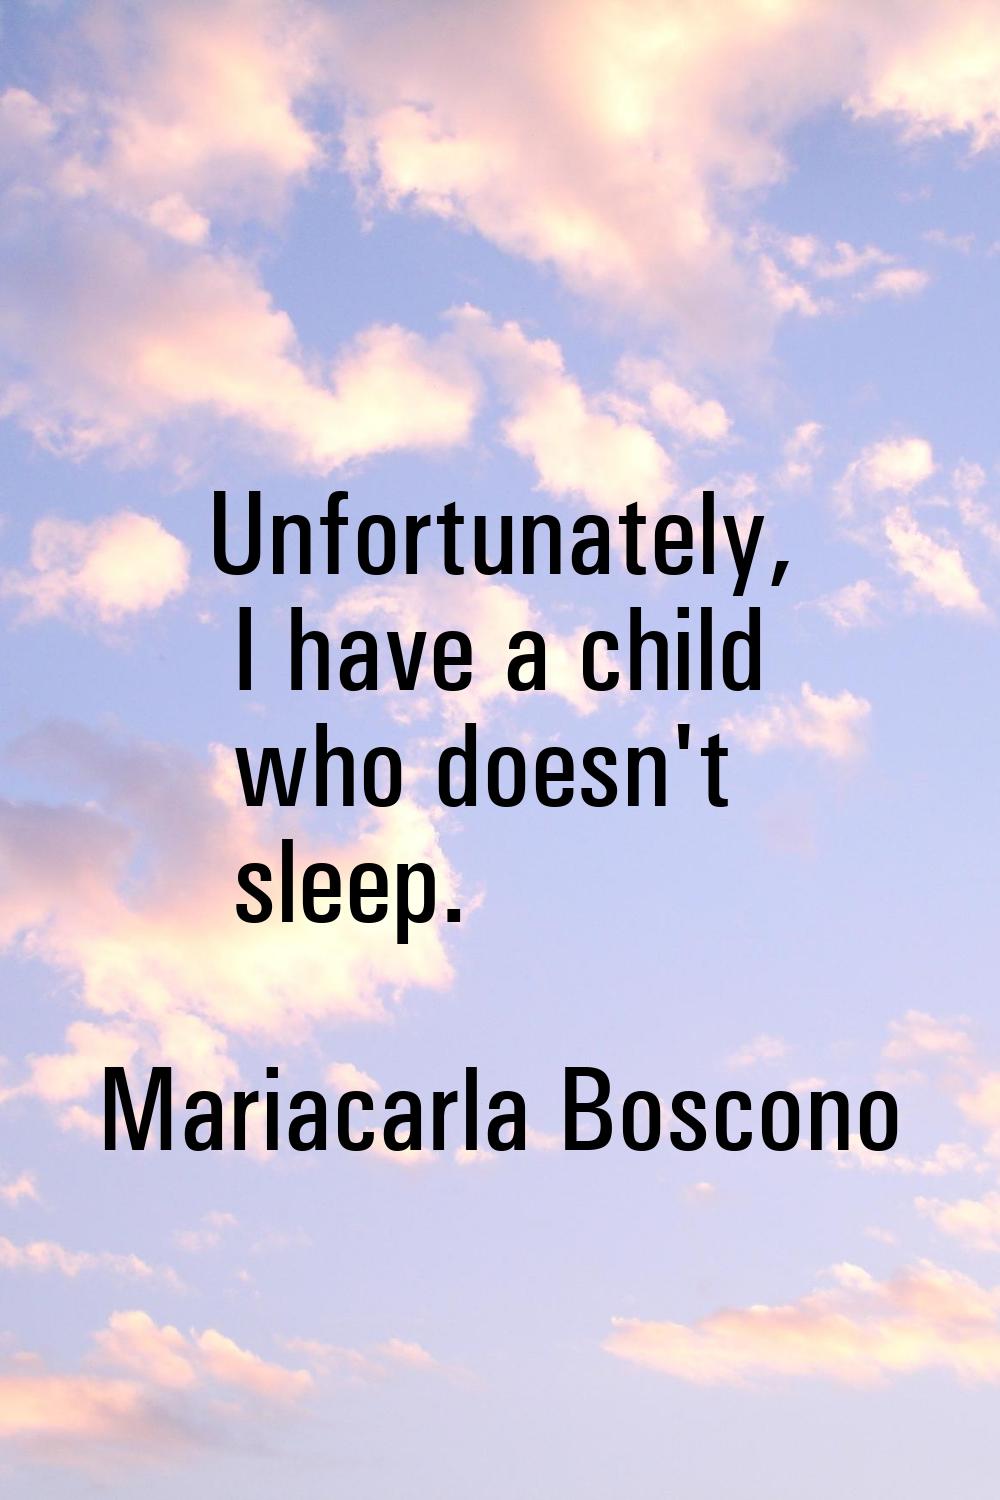 Unfortunately, I have a child who doesn't sleep.